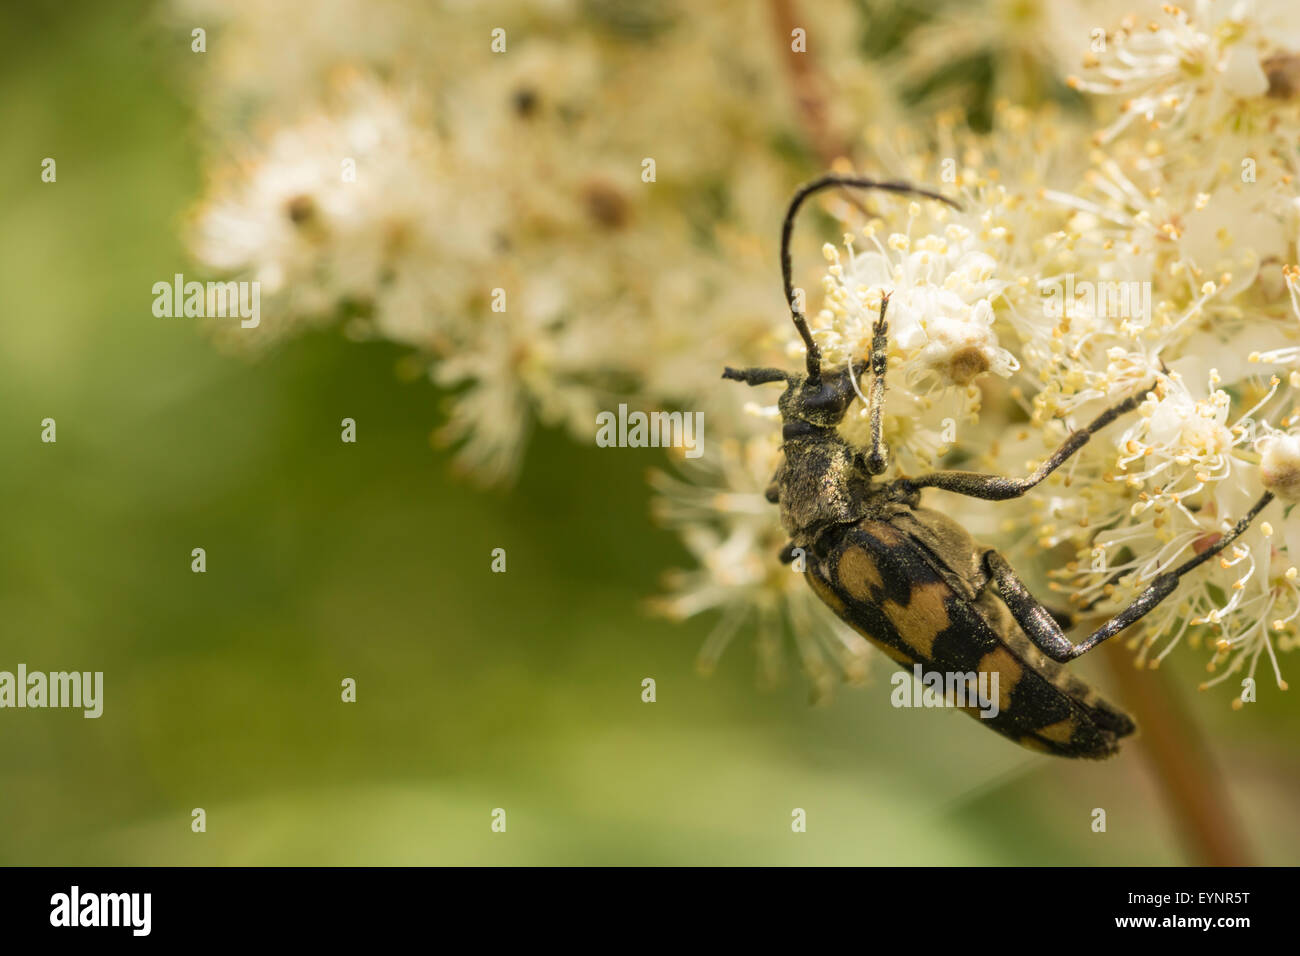 This is an image of a Strangalia maculata, one of the long-horned beetles. Stock Photo